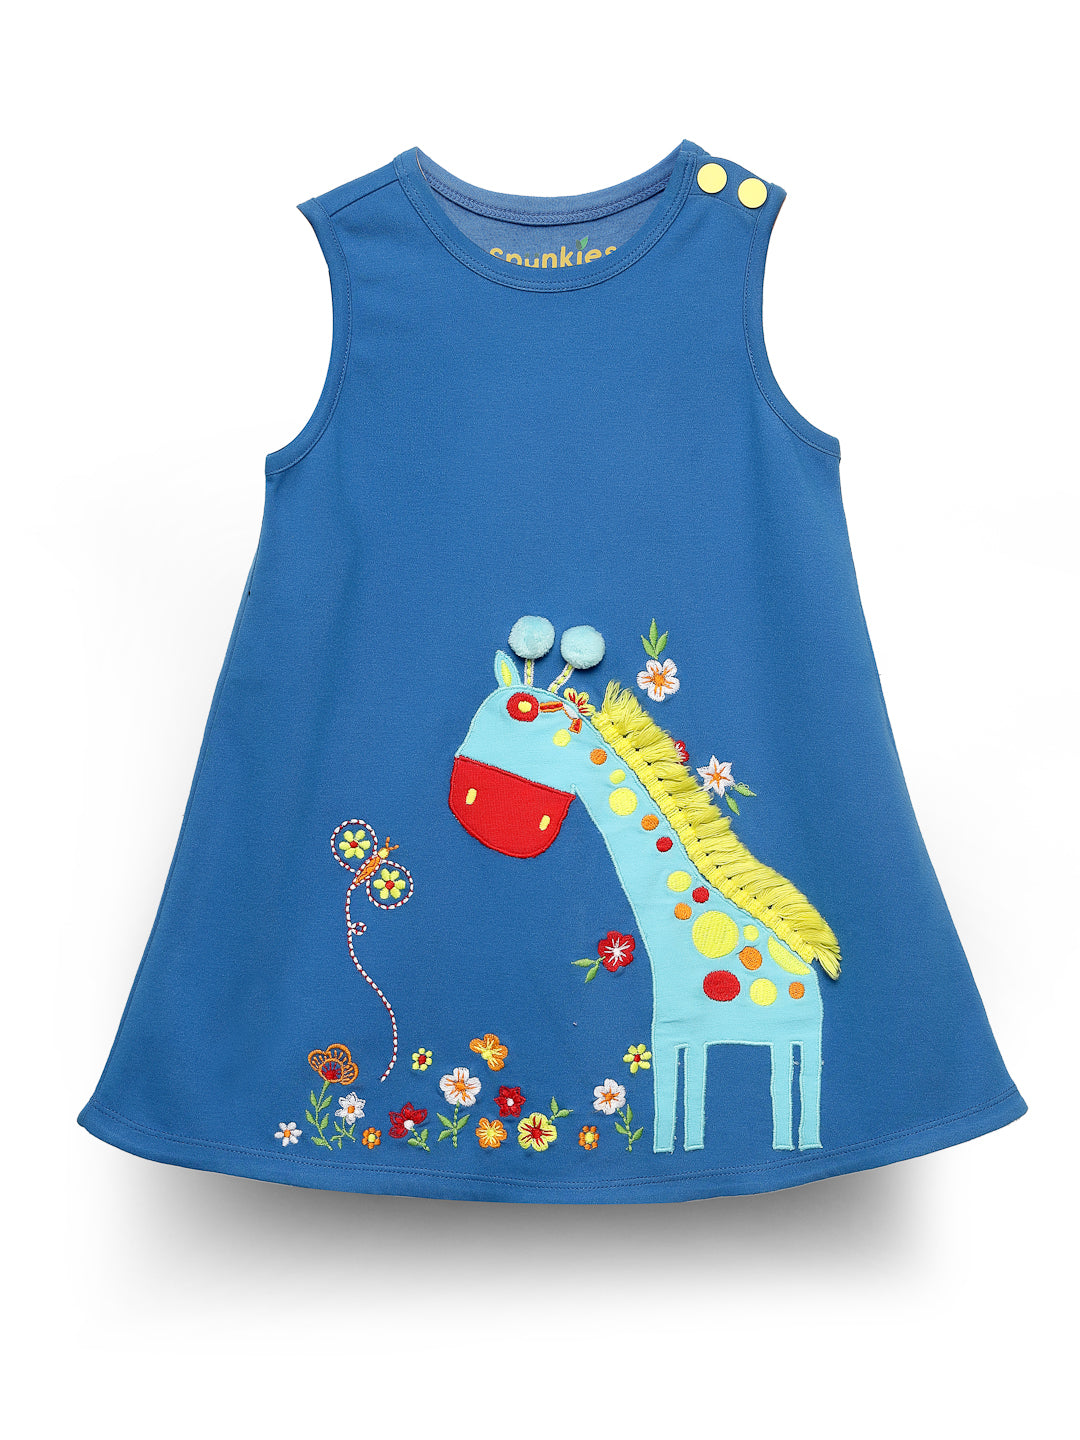 Fun-filled sleeveless top with embroidery